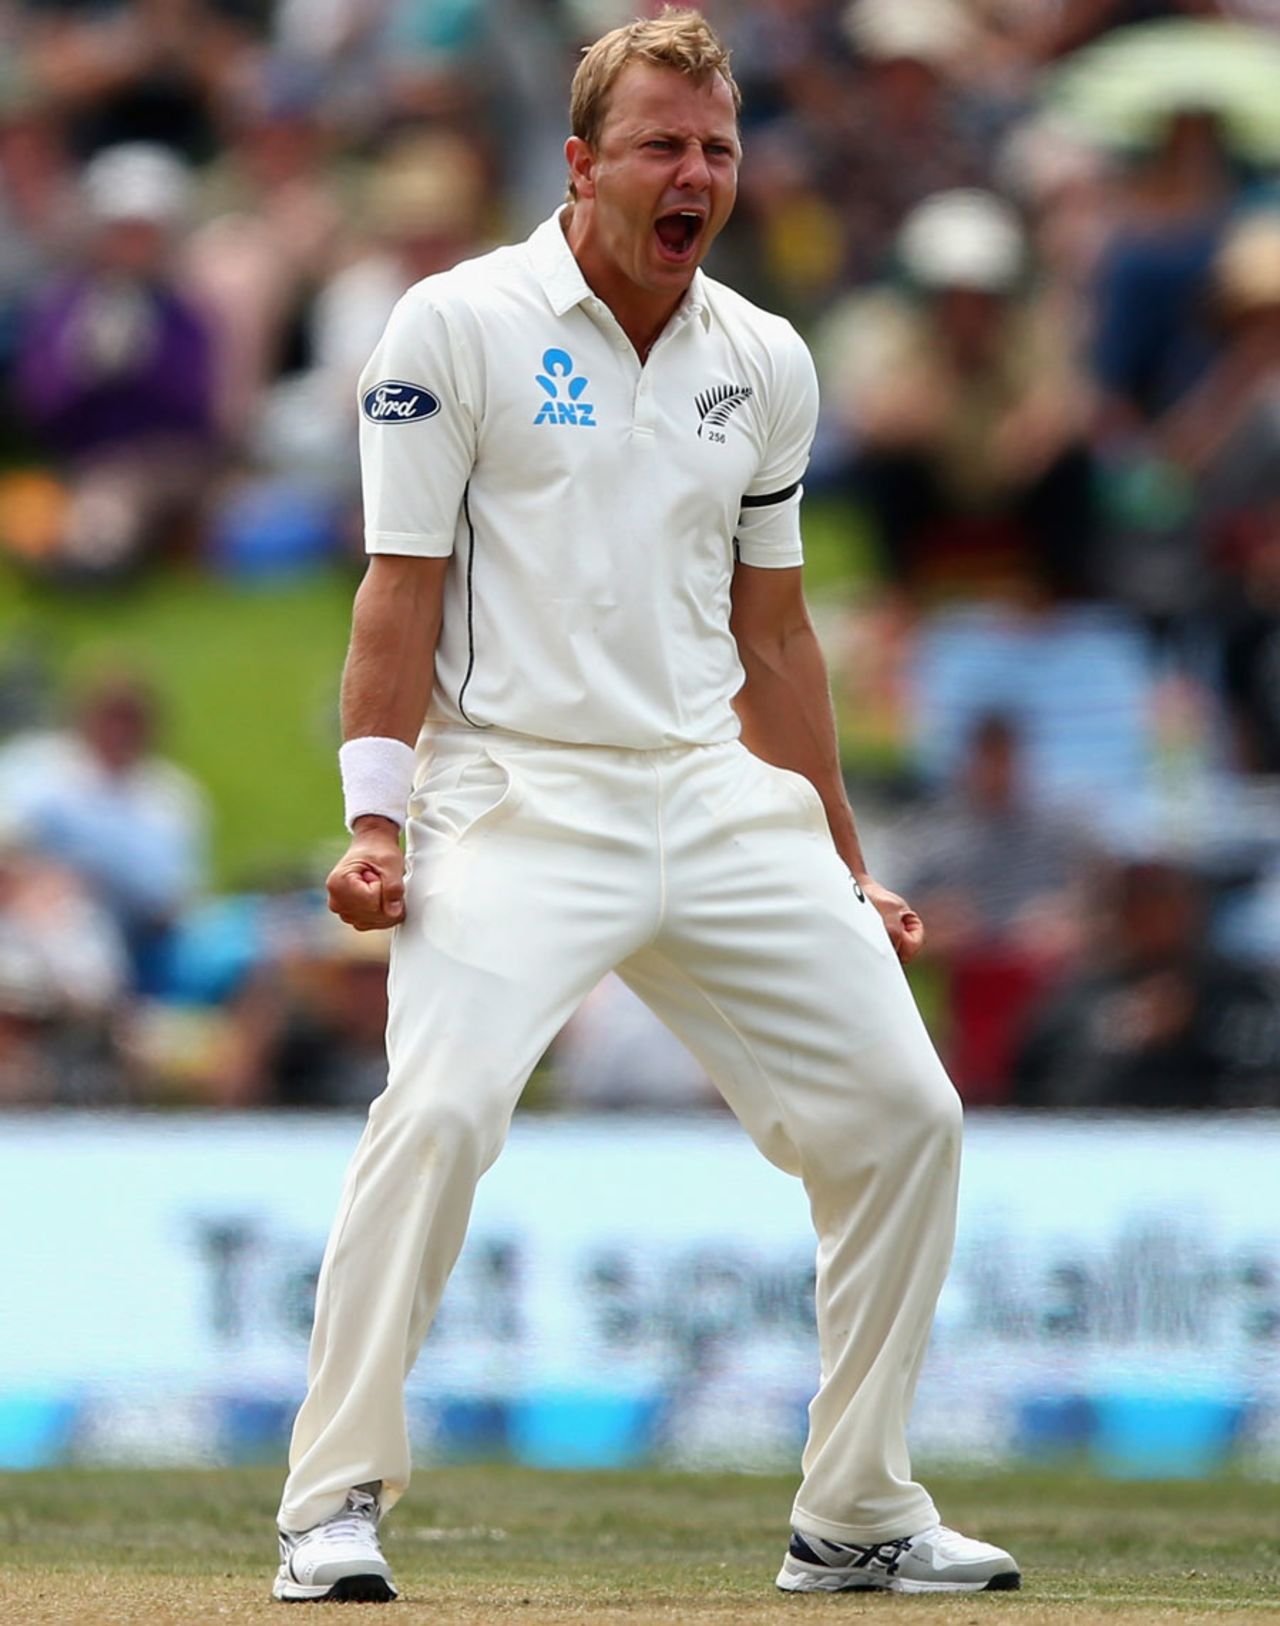 Neil Wagner is pumped up after dismissing Mitchell Marsh, New Zealand v Australia, 2nd Test, Christchurch, 3rd day, February 22, 2016